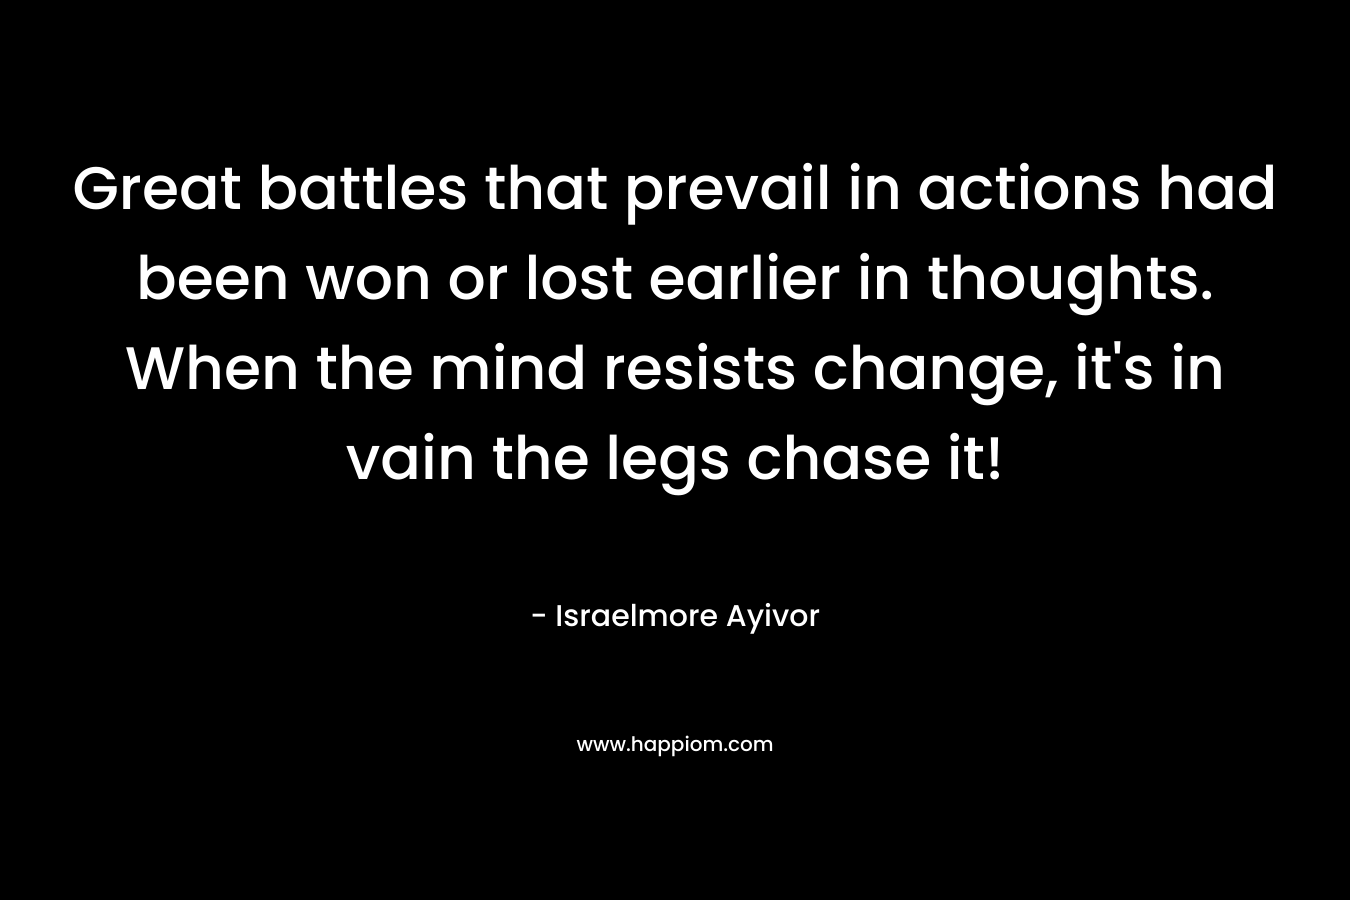 Great battles that prevail in actions had been won or lost earlier in thoughts. When the mind resists change, it’s in vain the legs chase it! – Israelmore Ayivor